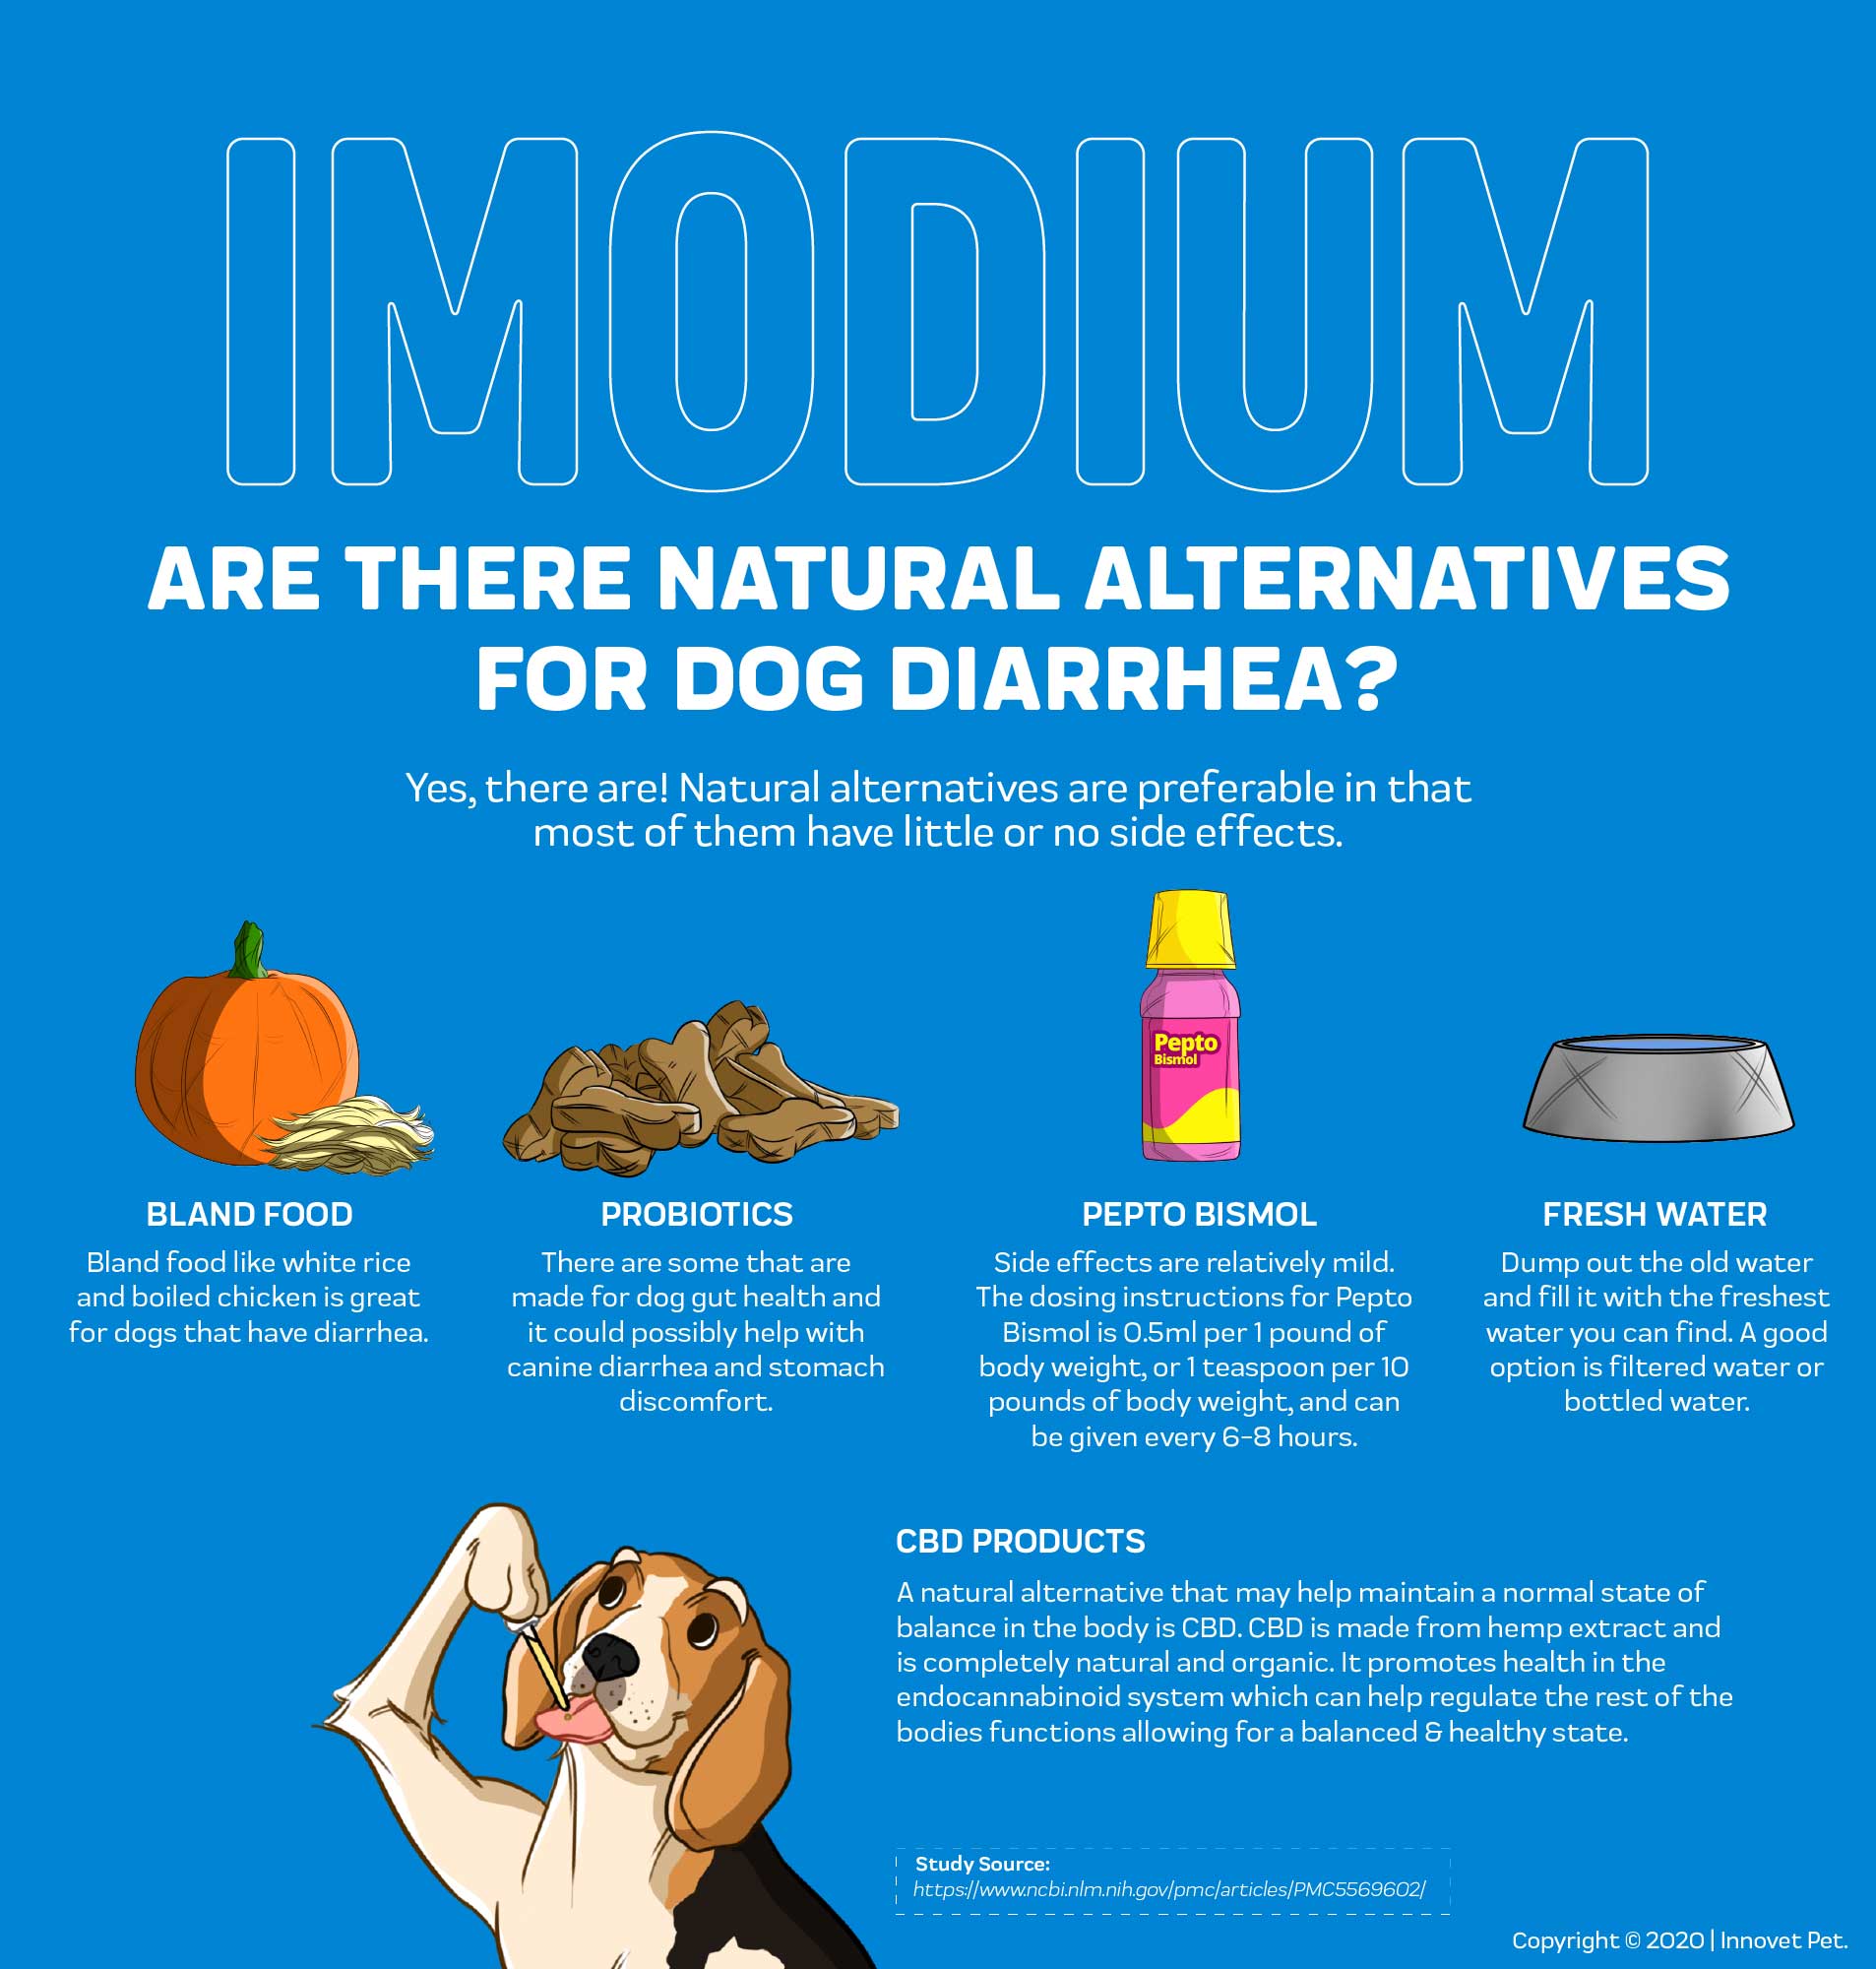 can i give imodium to dogs